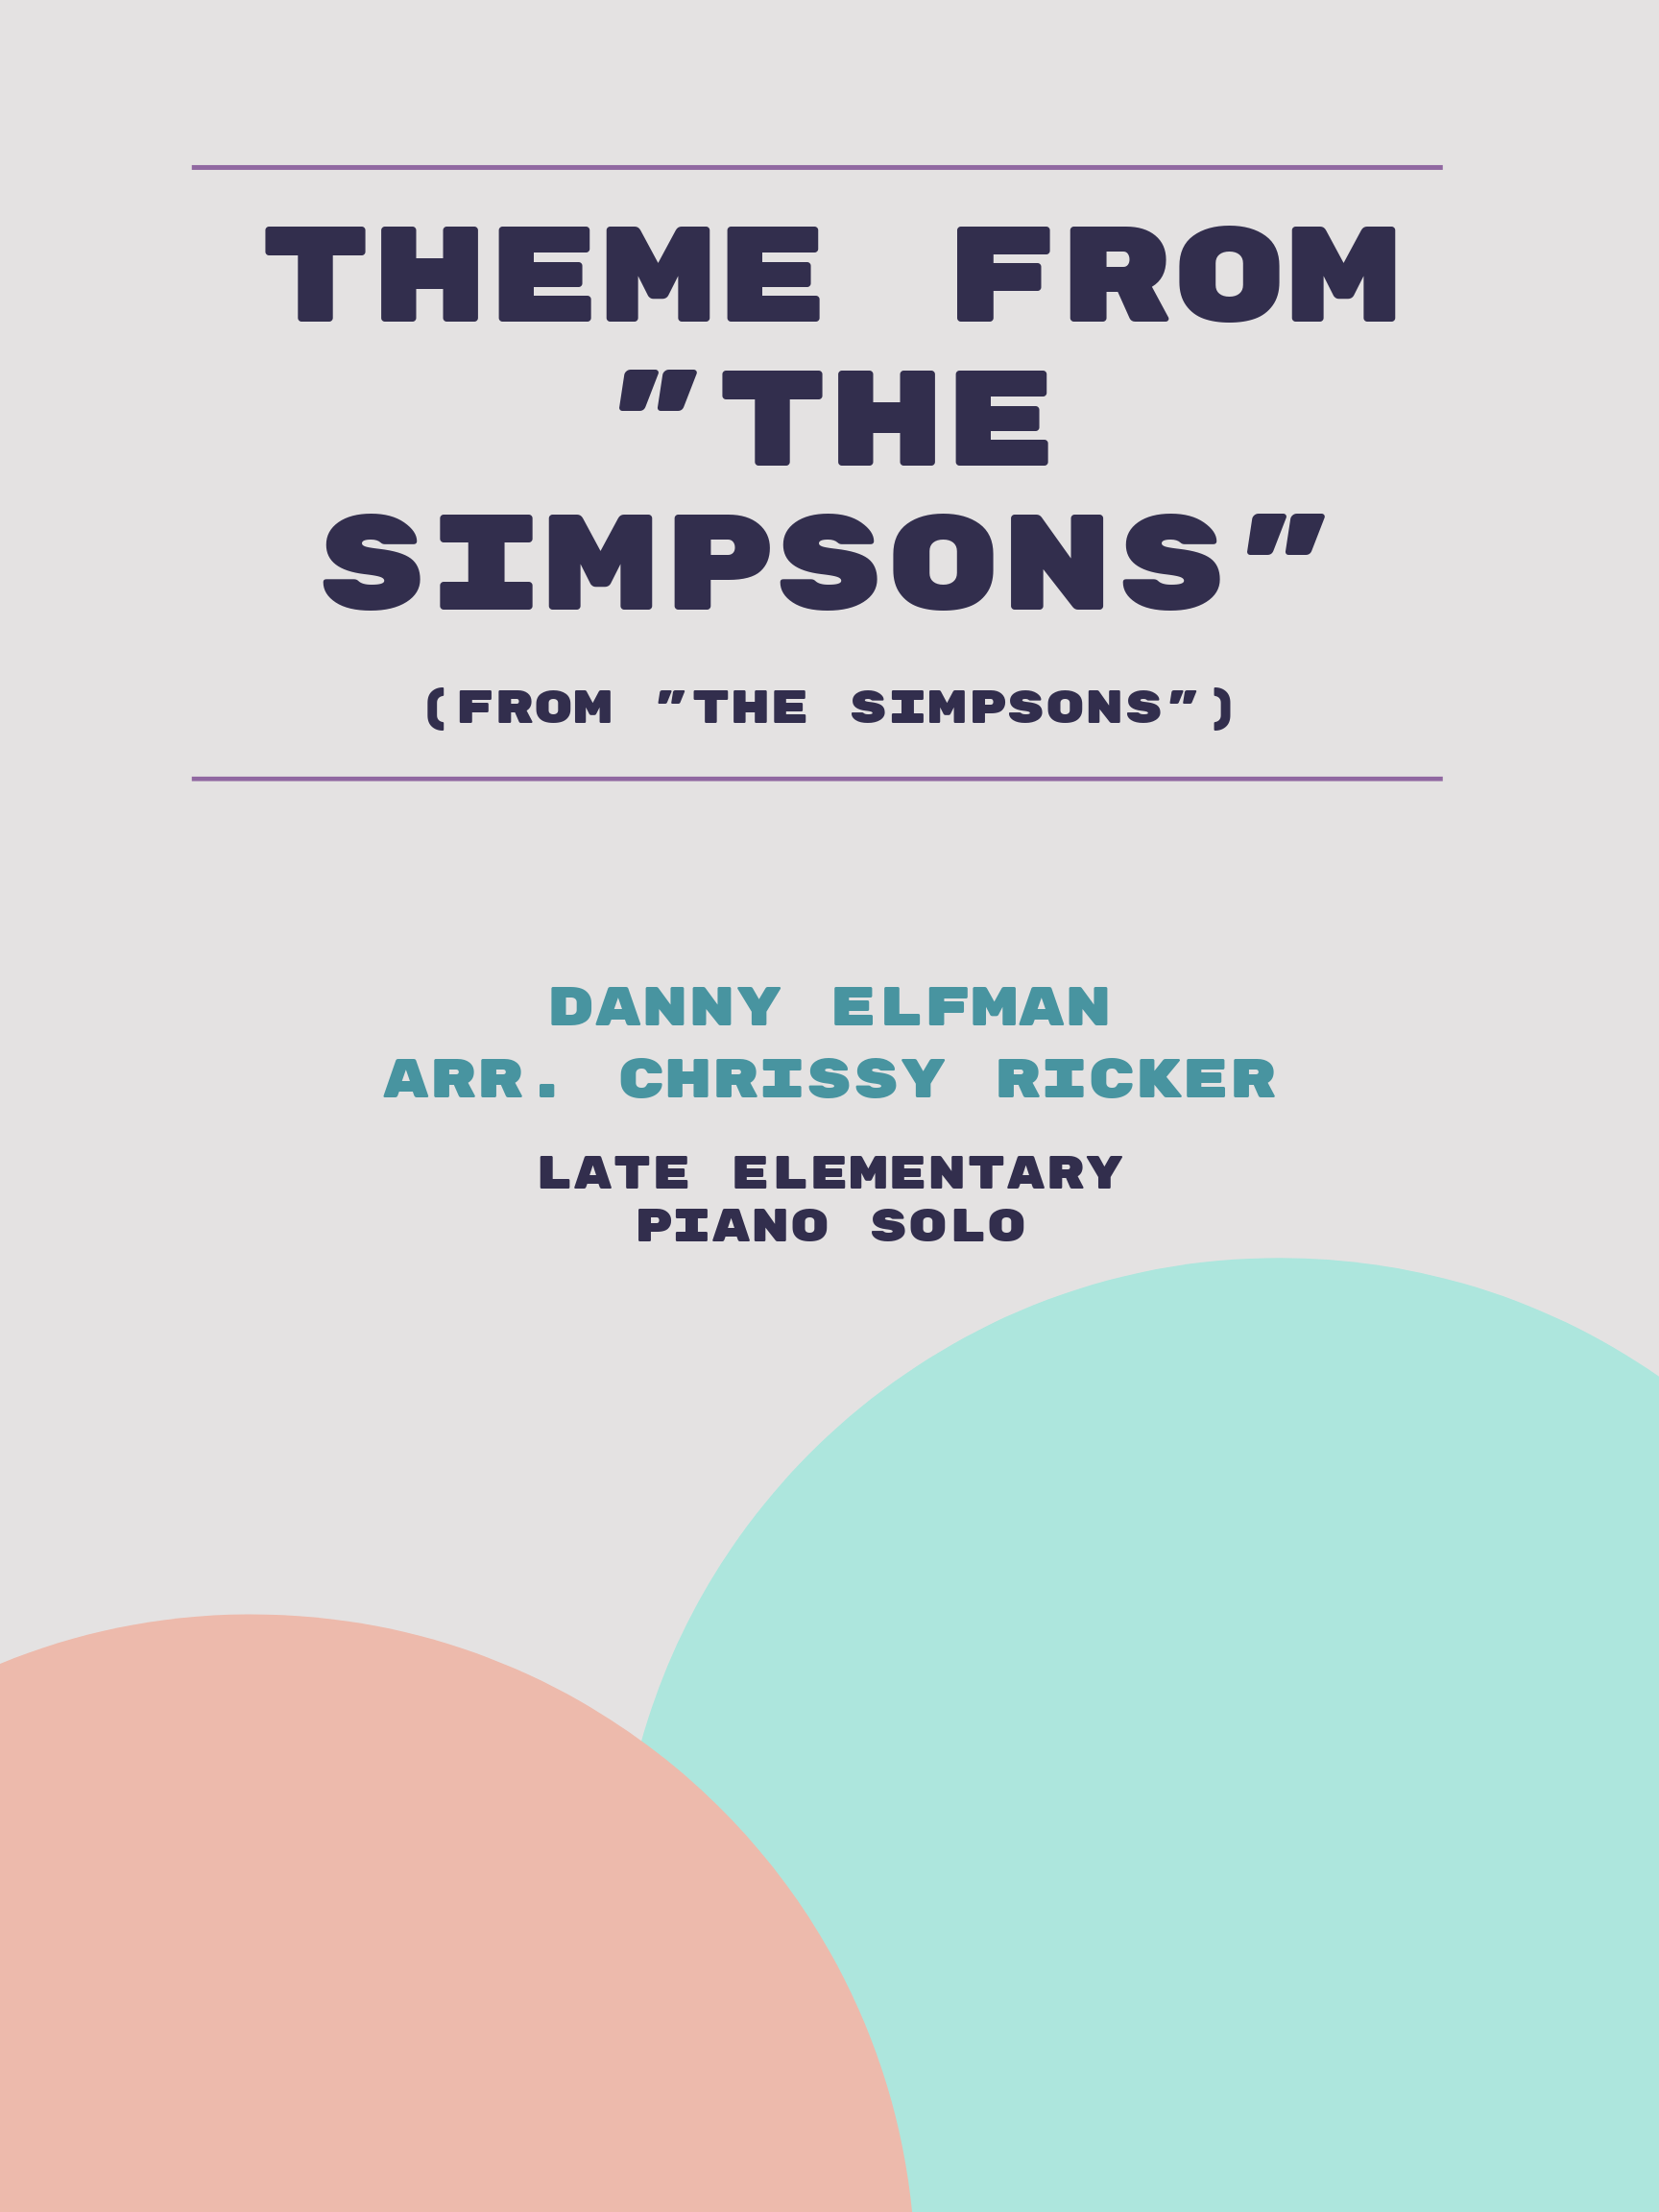 Theme from "The Simpsons" by Danny Elfman